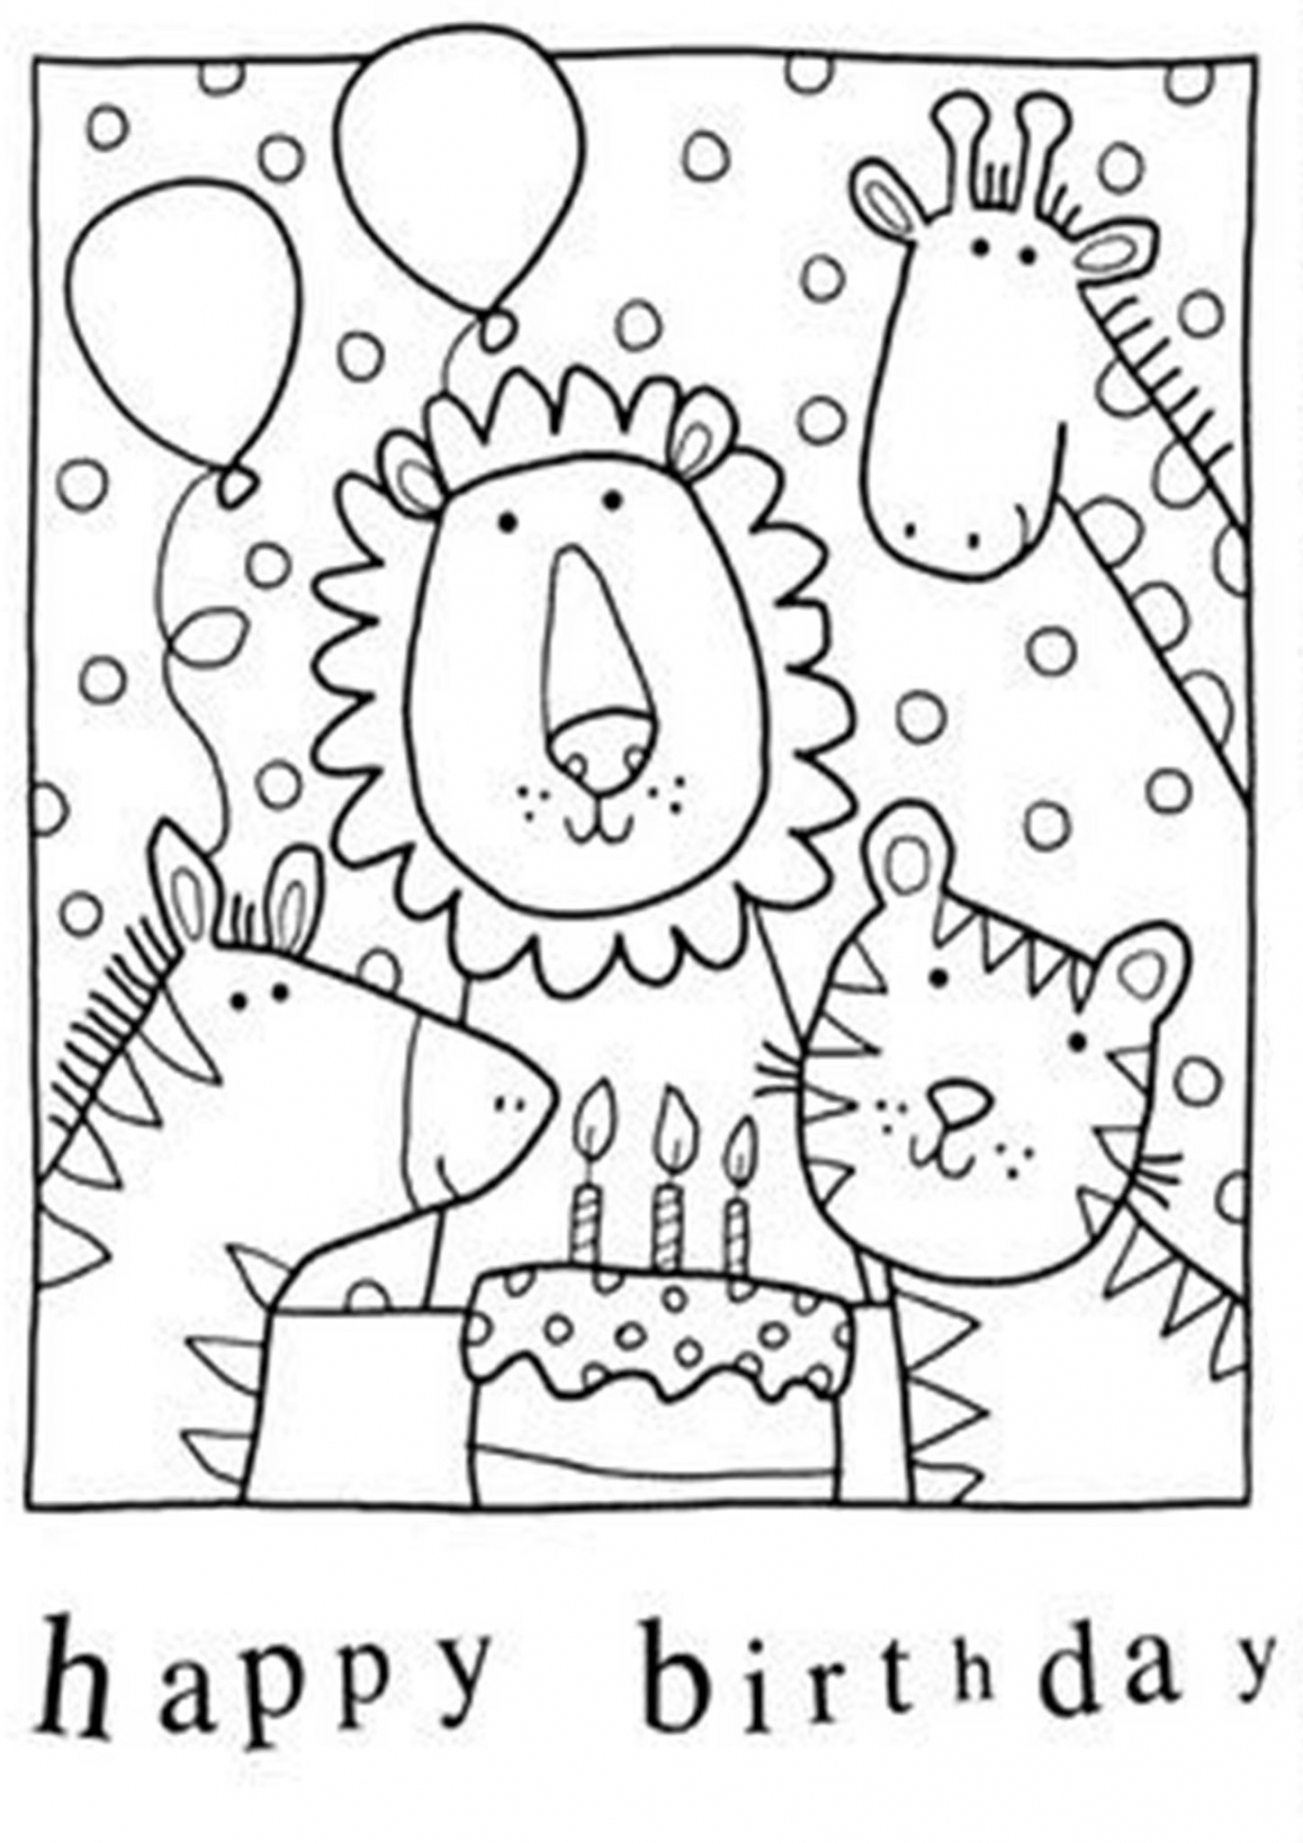 Free Printable Happy Birthday Coloring Pages - Printable - Pin on Colour pages